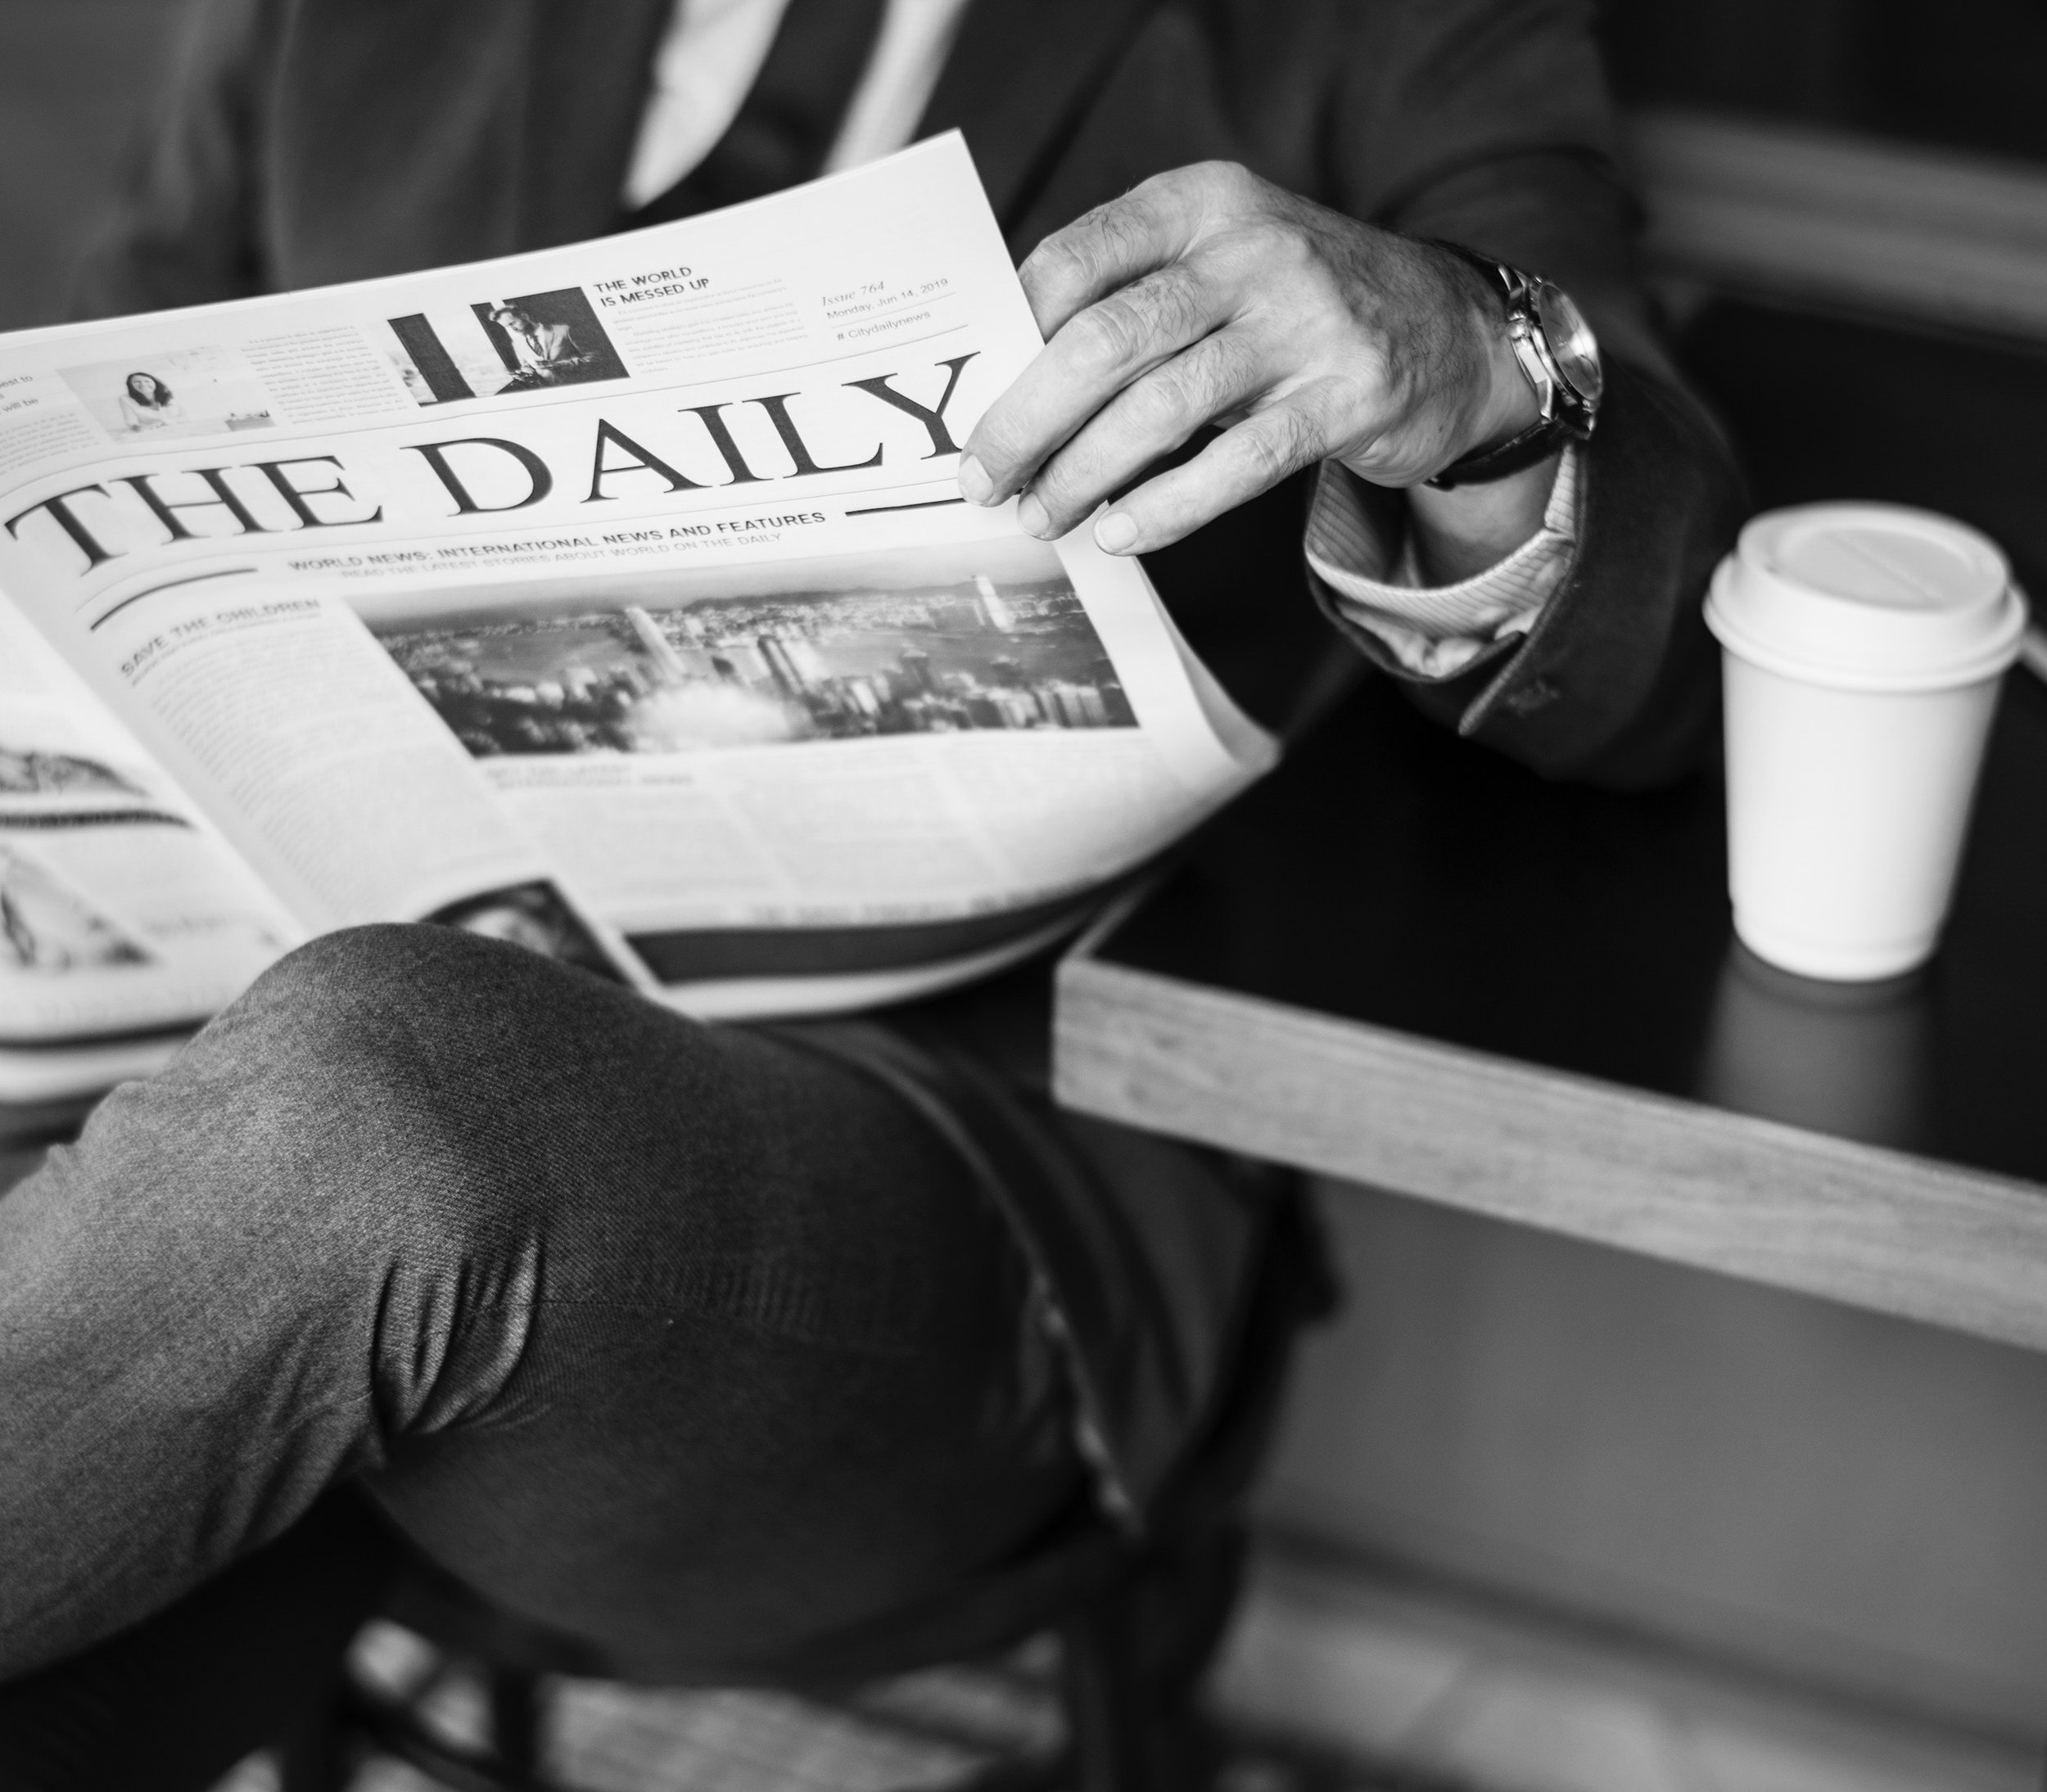 A man sits with one leg crossed, reading a newspaper, with a cup of coffee beside him